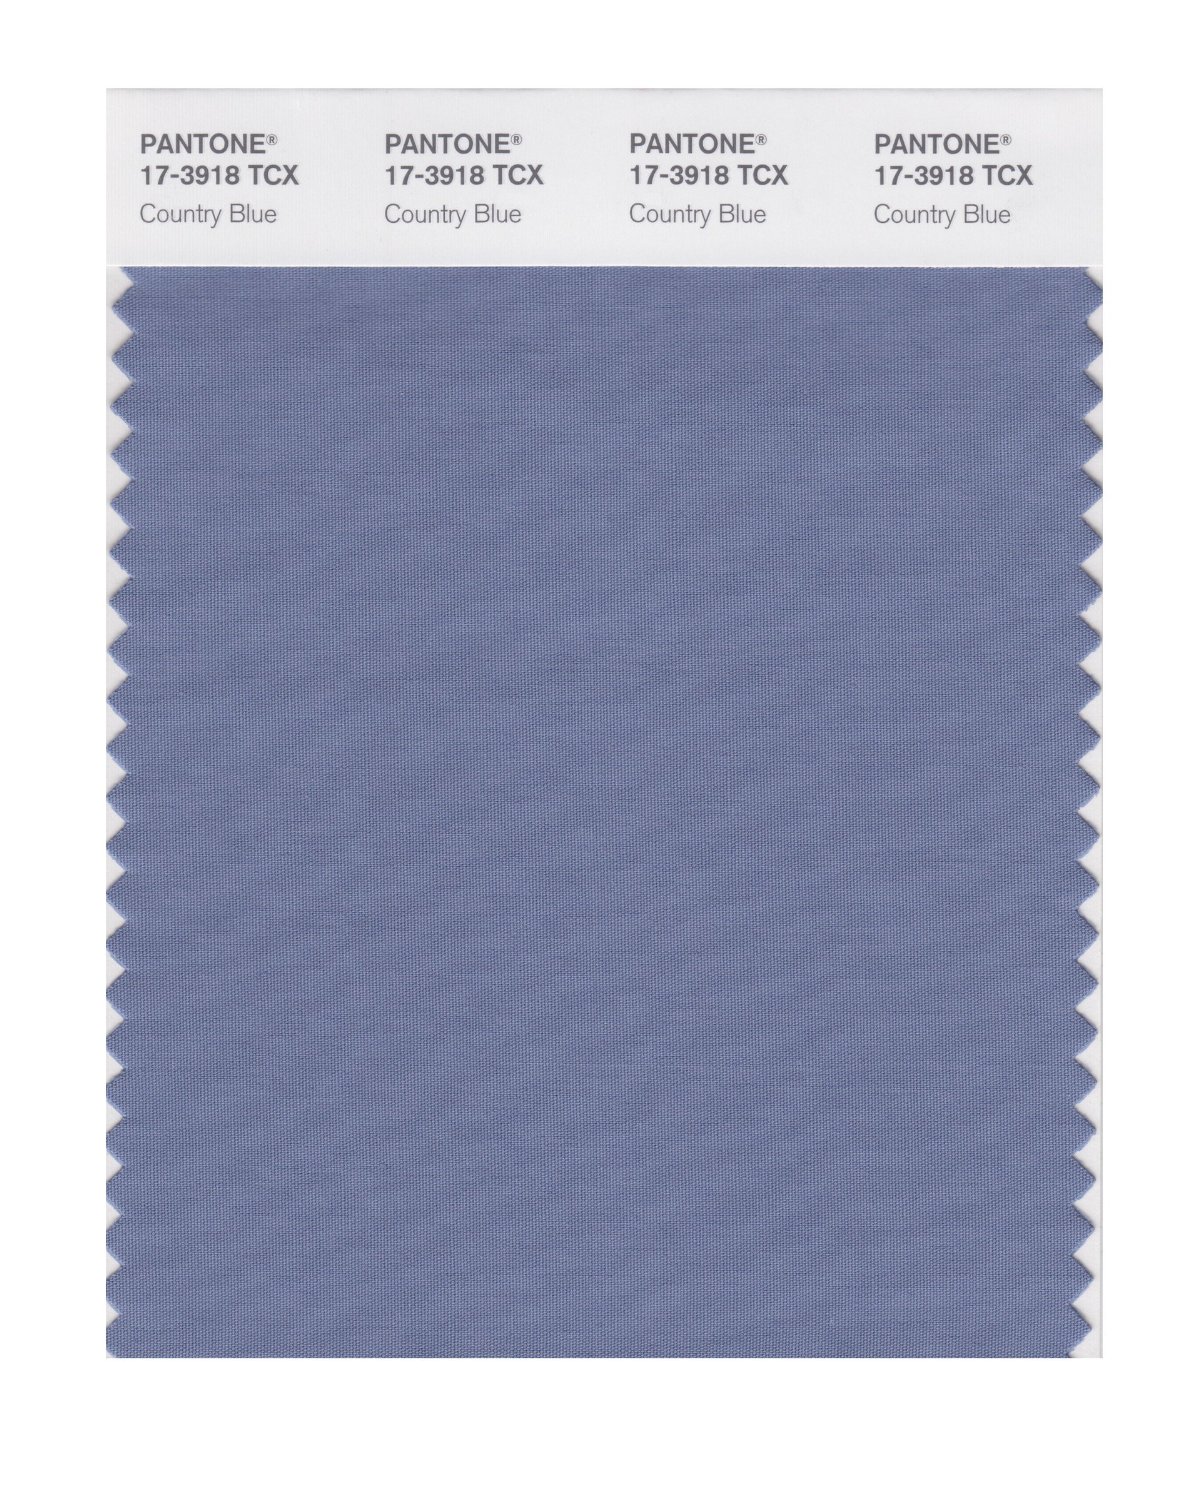 Pantone Cotton Swatch 17-3918 Country Blue